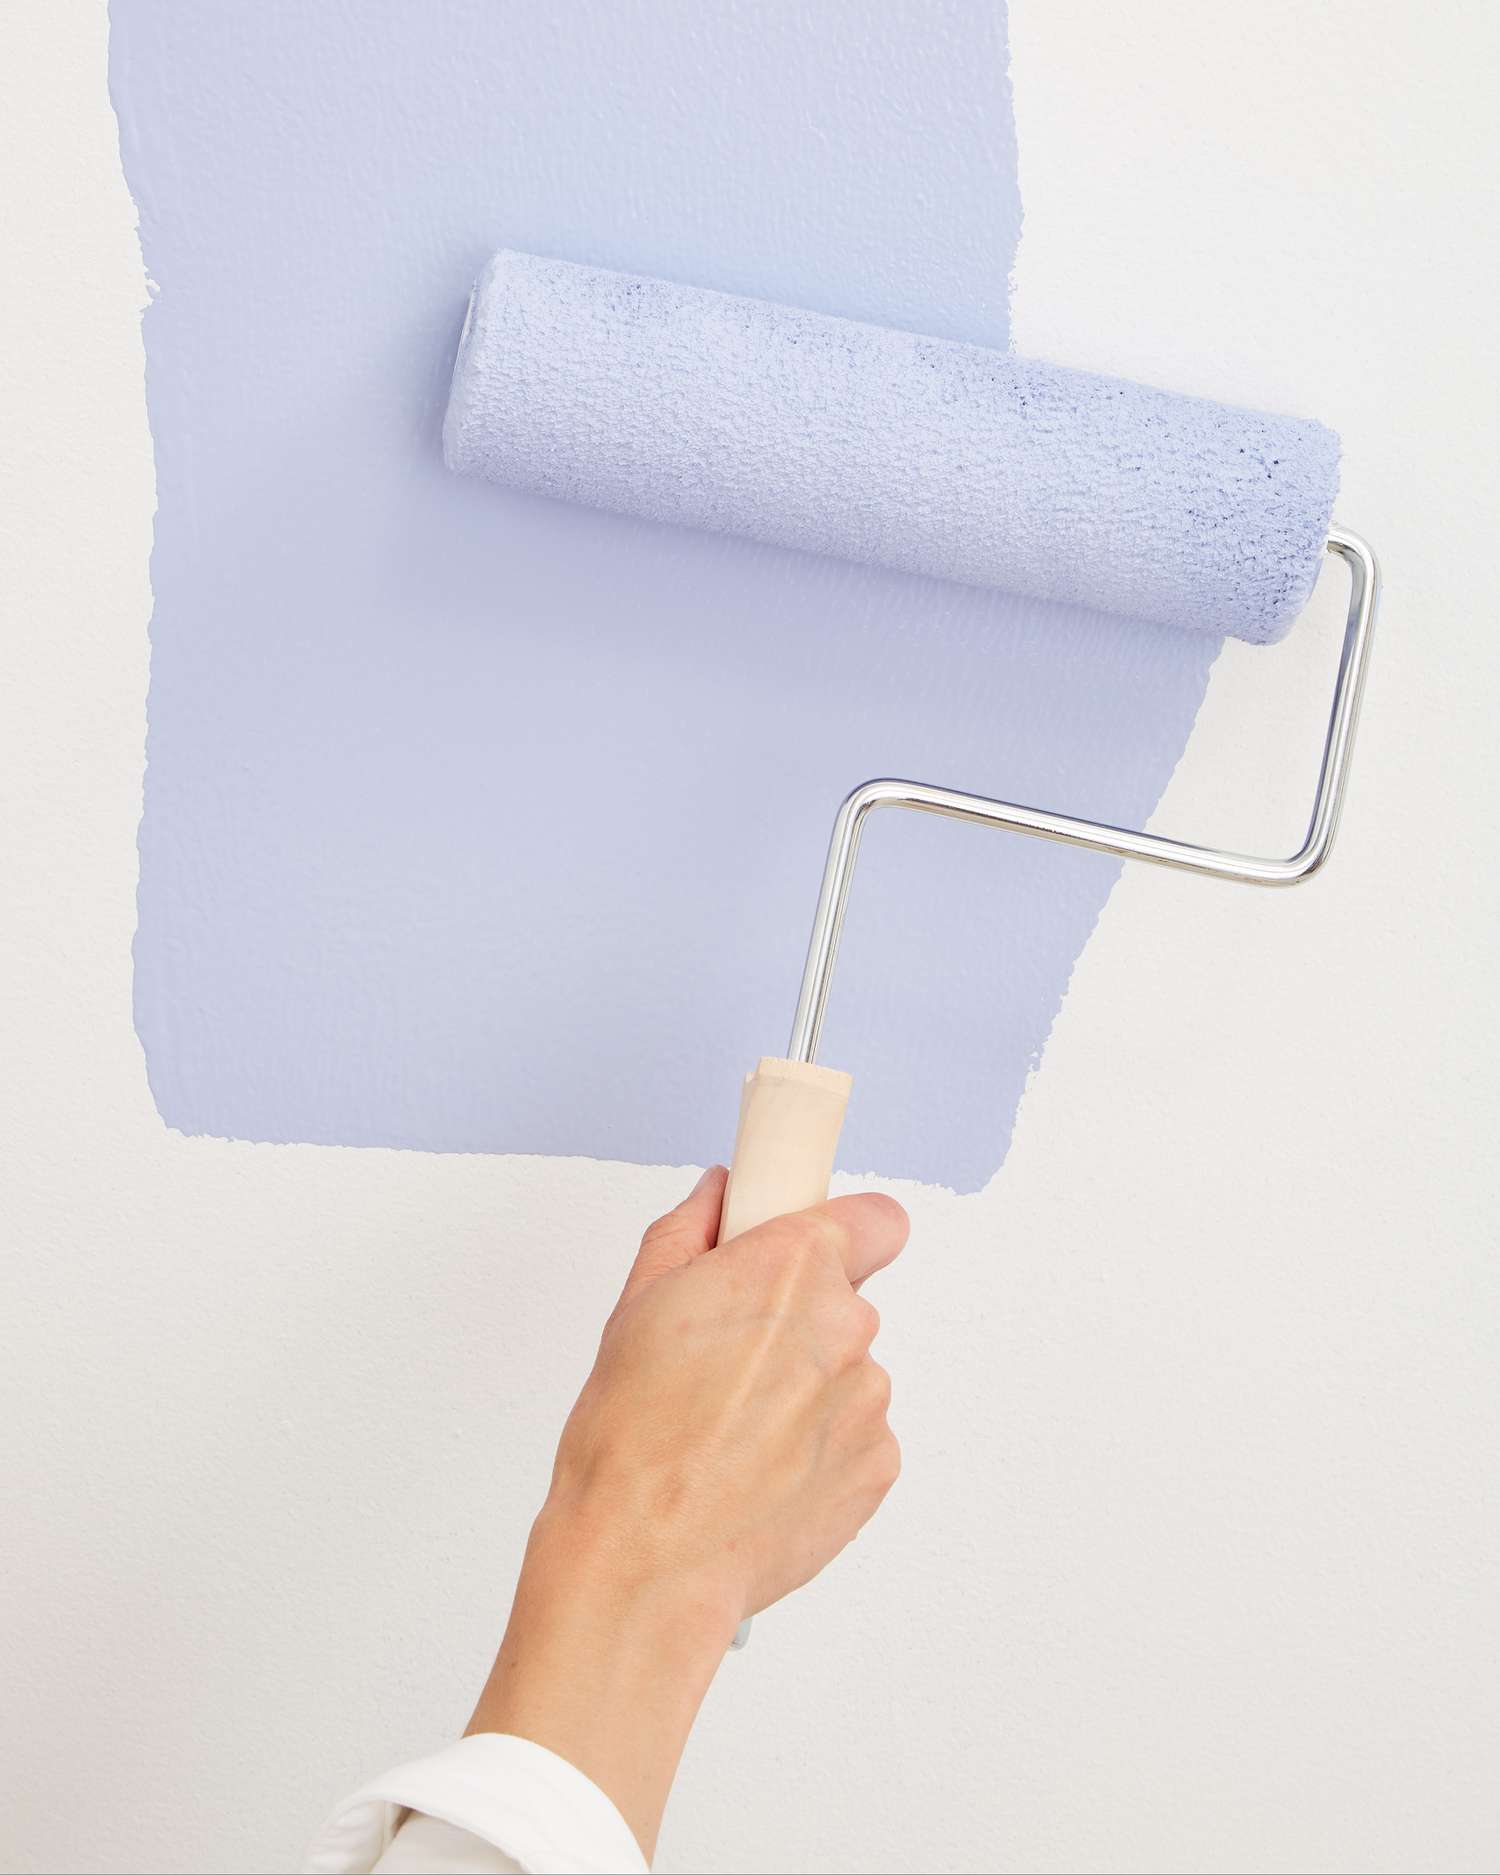 How to prepare walls for painting – 5 steps for the perfect finish